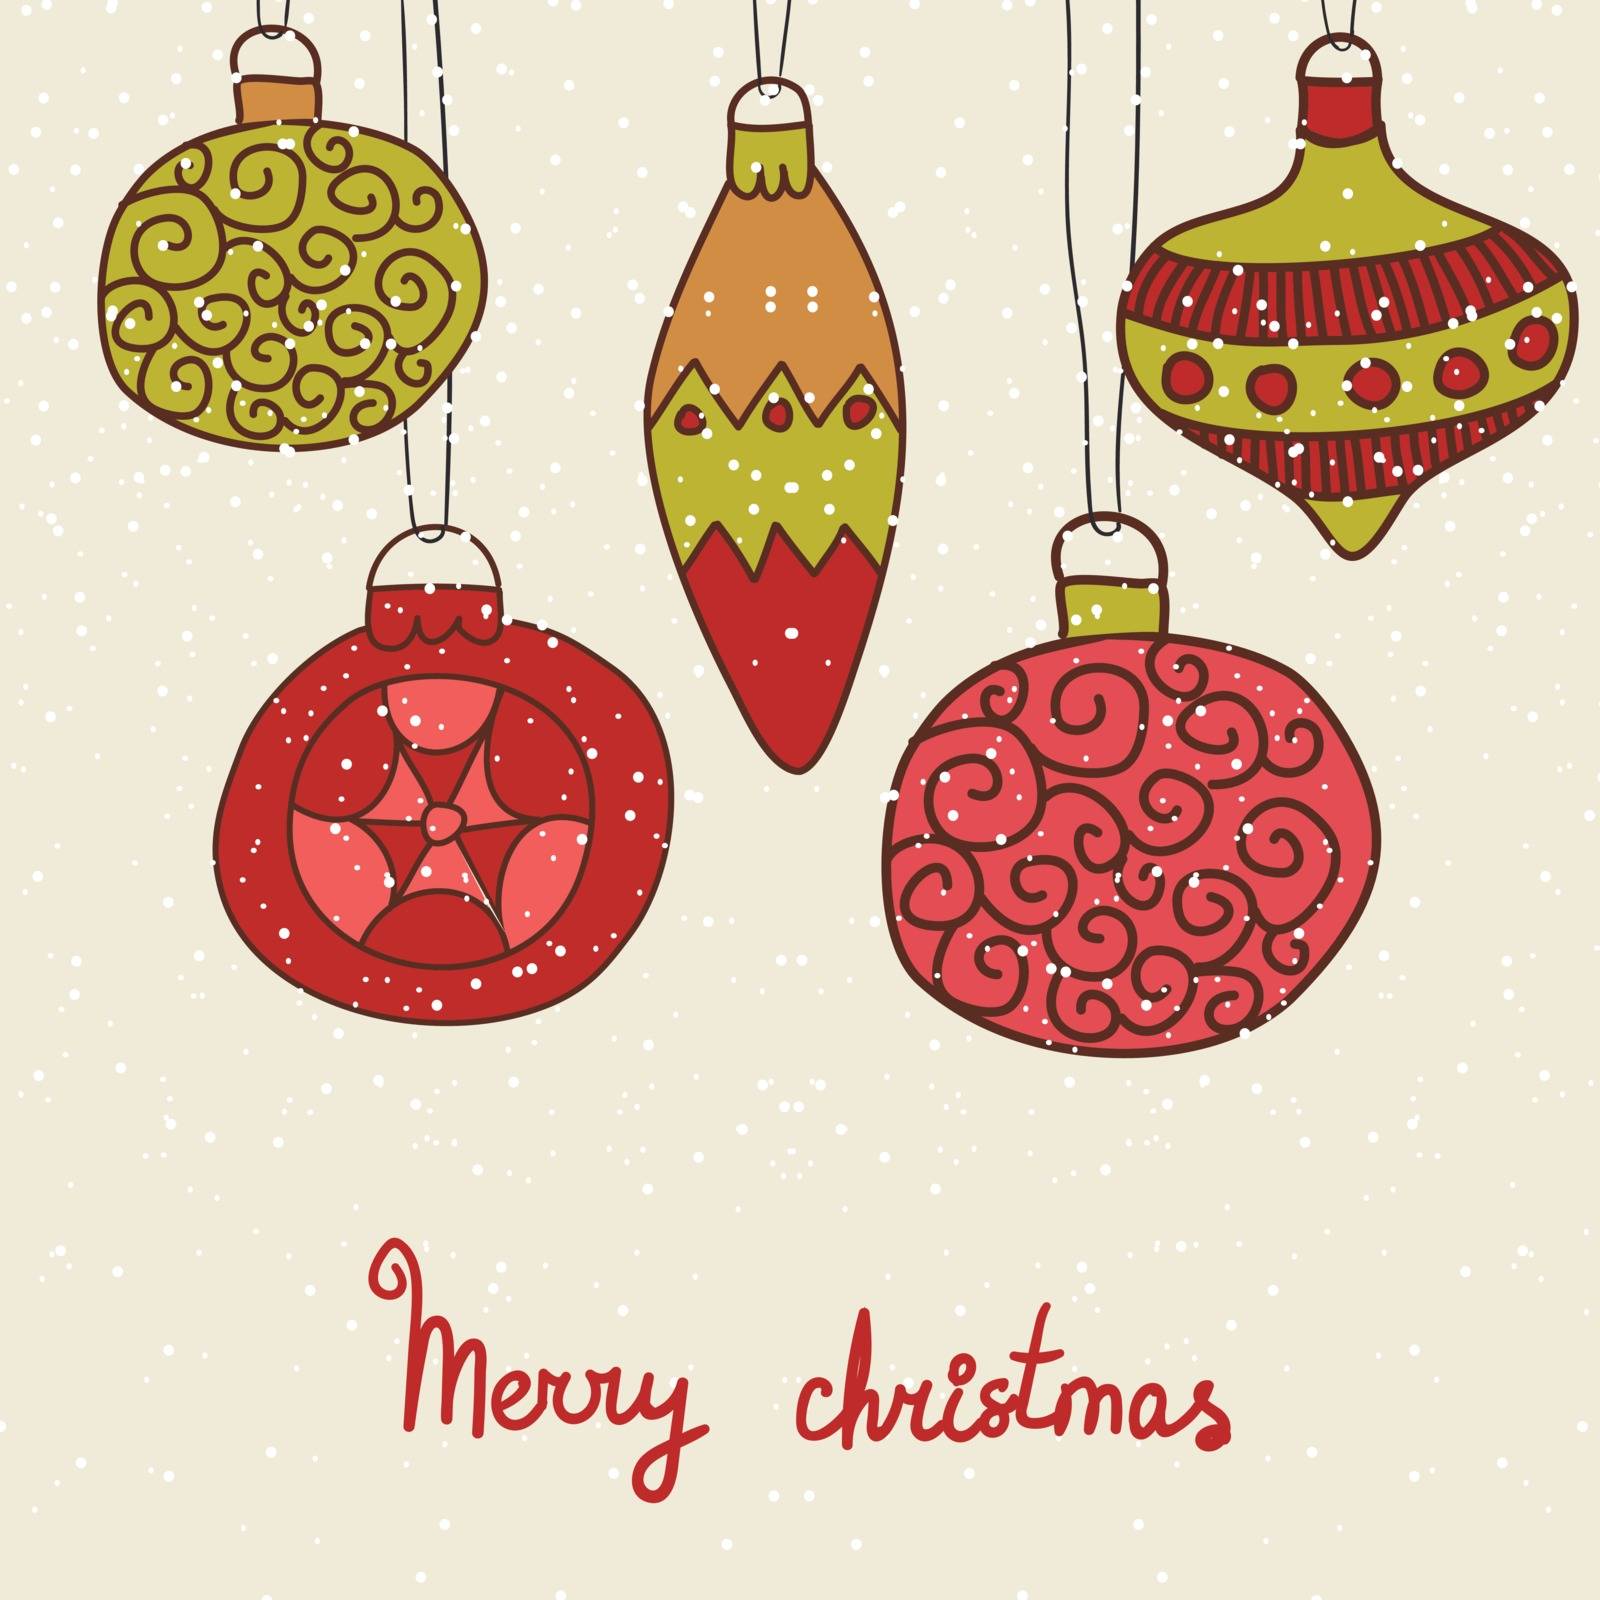 Christmas hand drawn decorative postcard with xmas toys and balls hanging on ornate laces with beads. Vector illustration